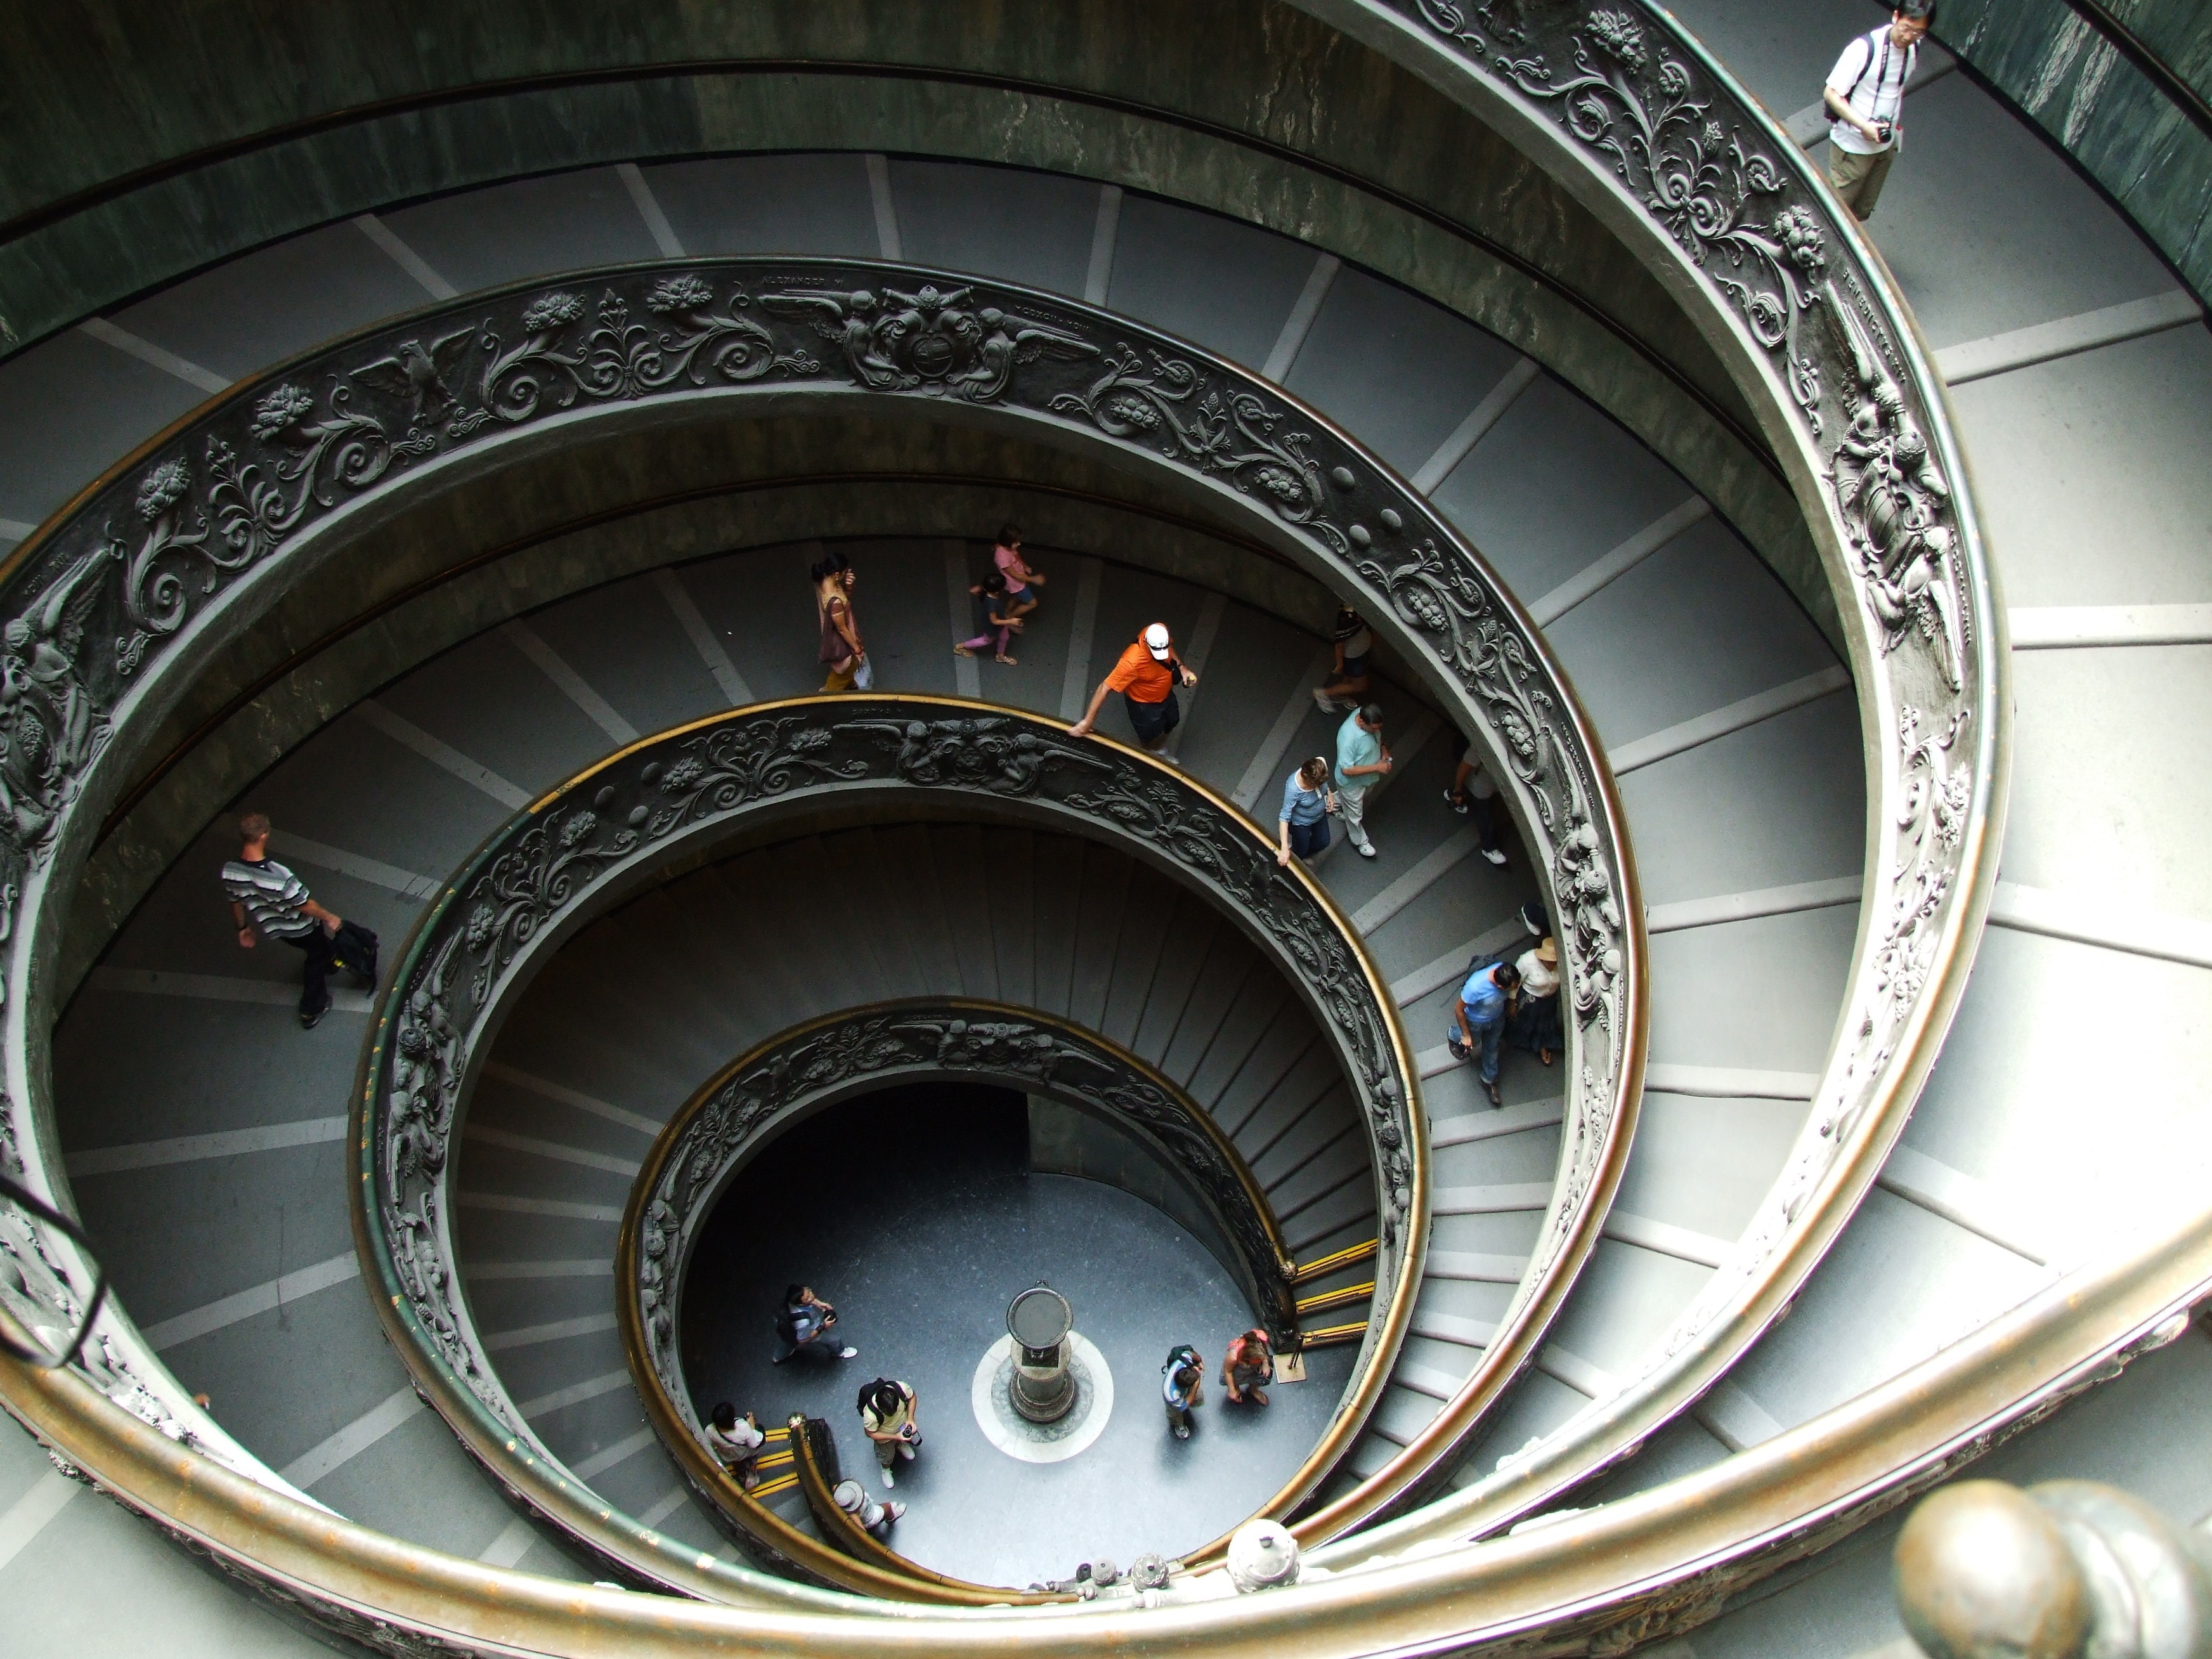 building interior spiral staircase with people walking